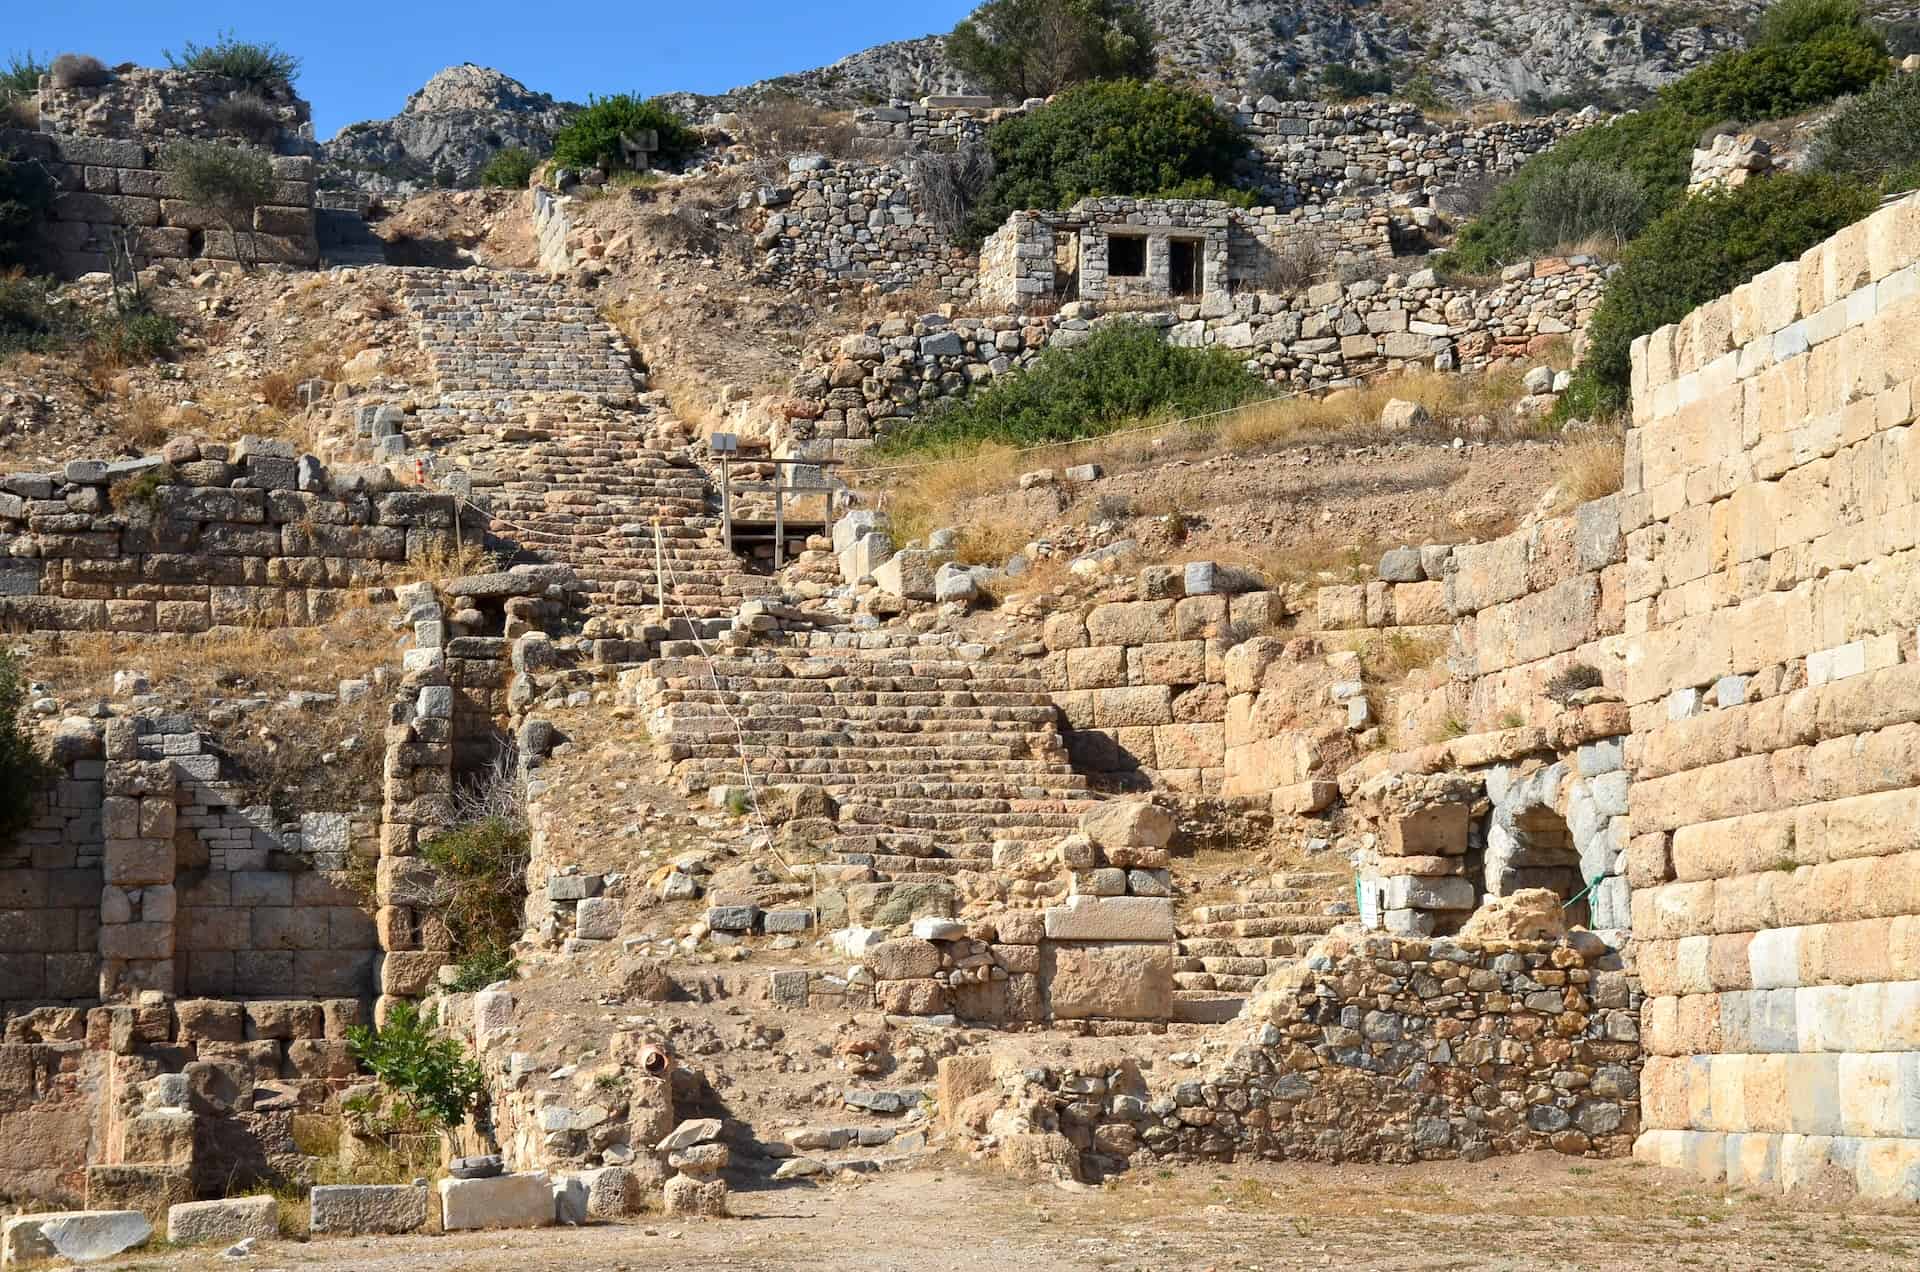 Stairs to the upper terraces at Knidos on Datça Peninsula, Turkey